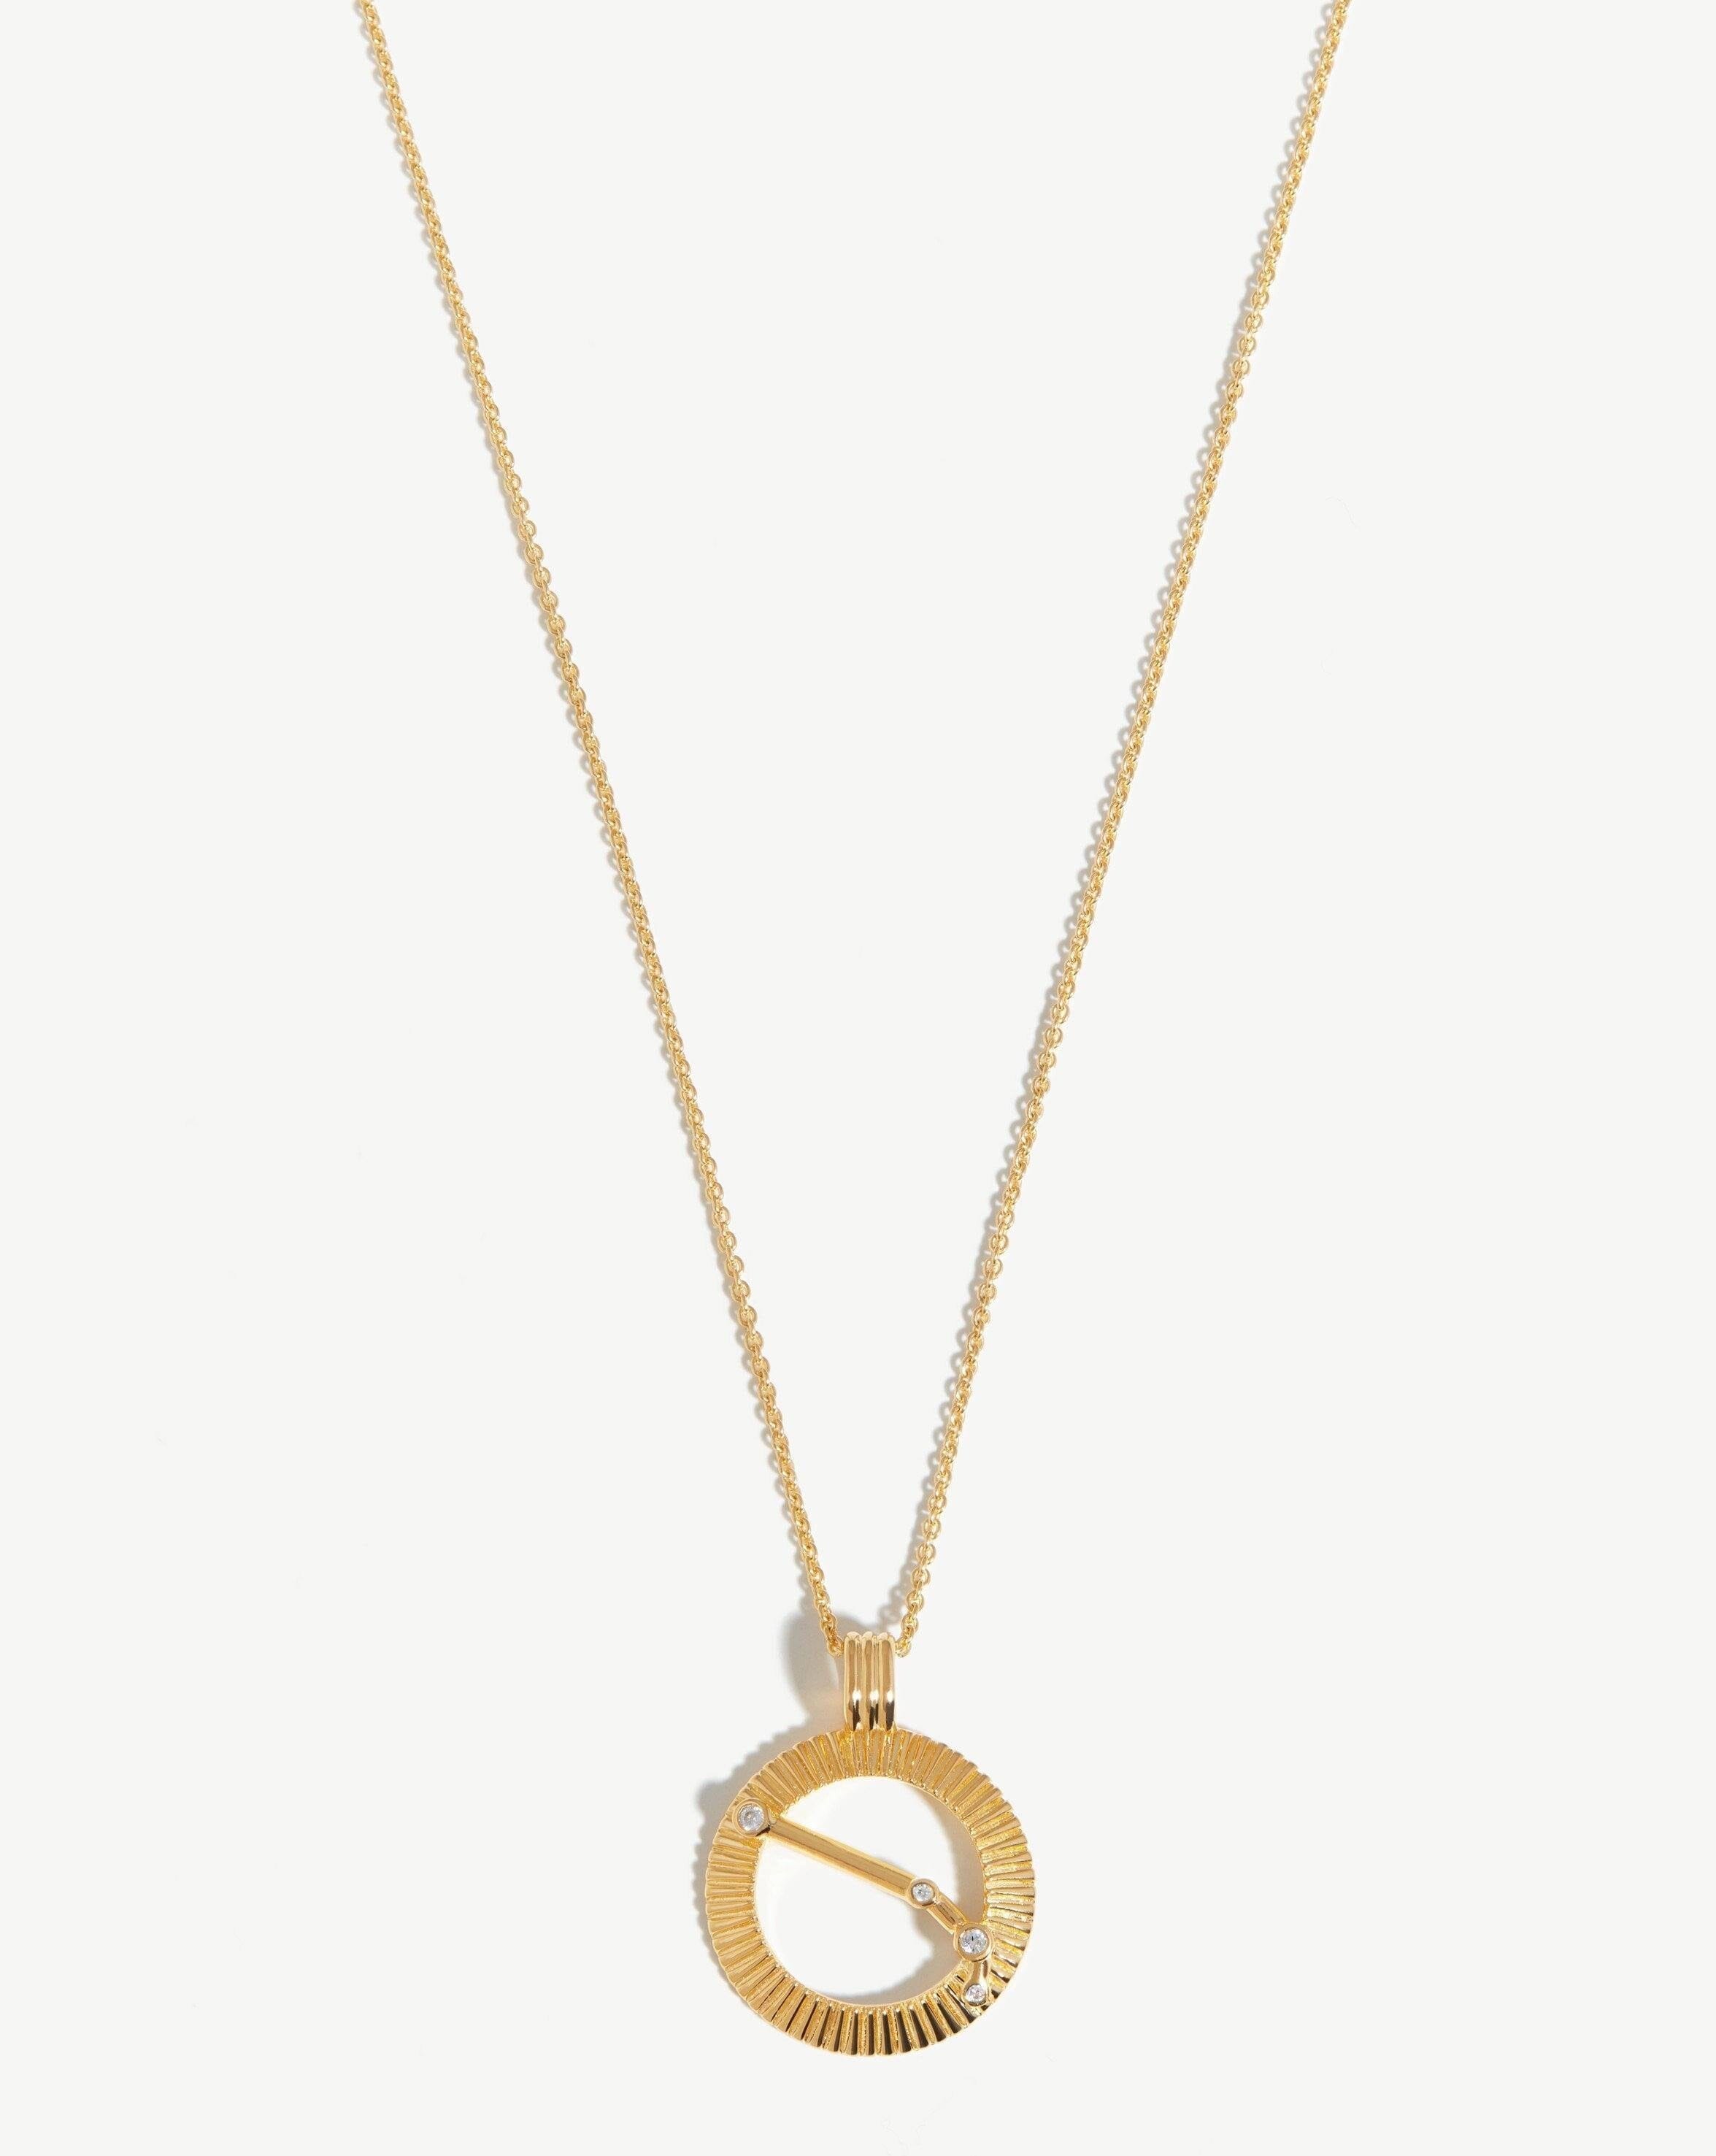 Zodiac Constellation Pendant Necklace - Aries | 18ct Gold Plated Vermeil/Aries Necklaces Missoma 